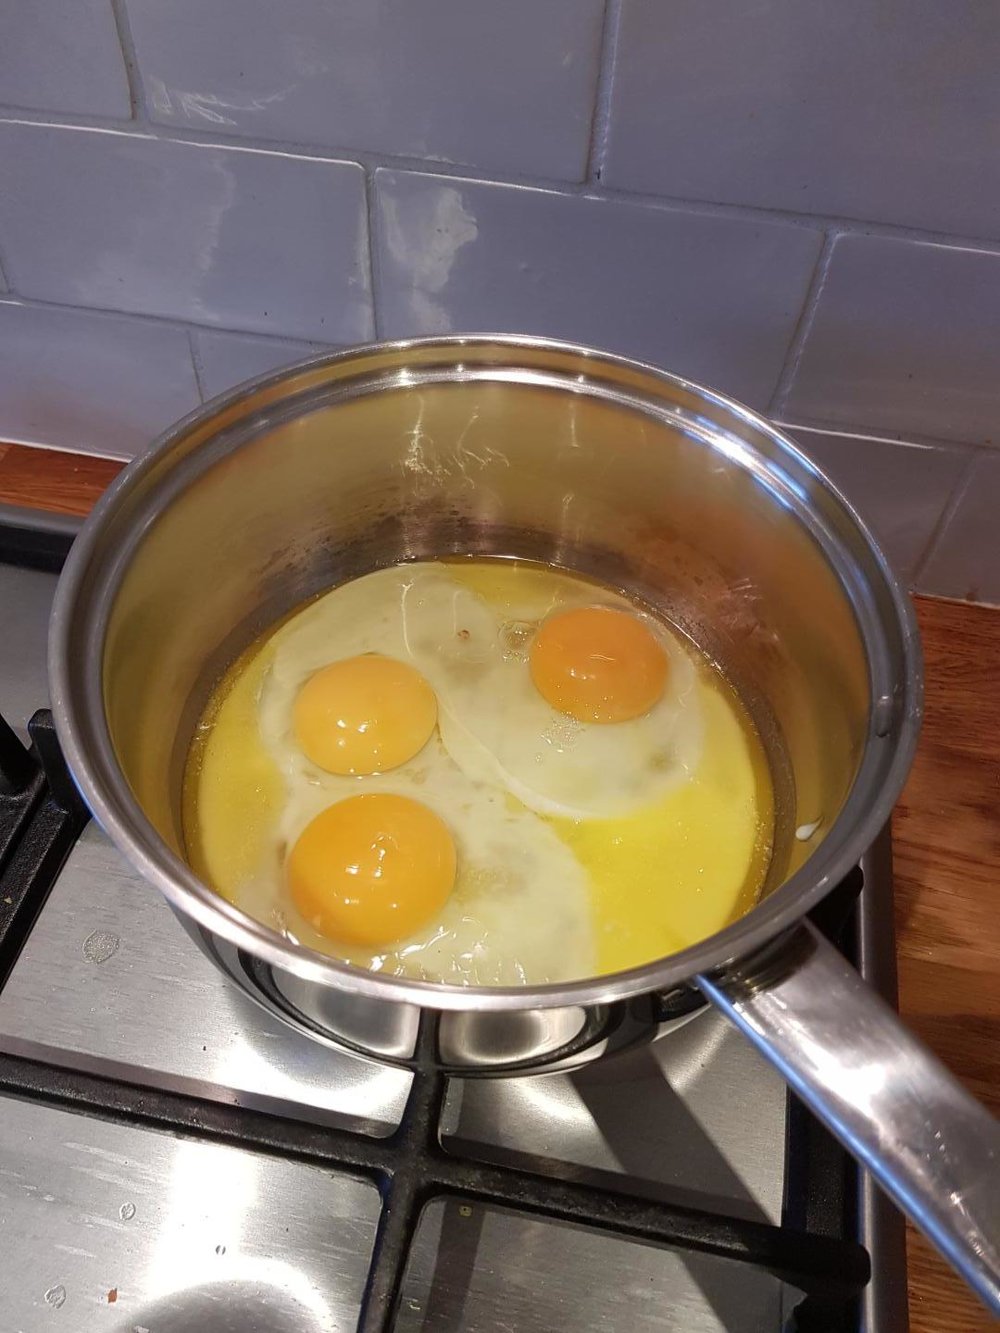  2: Start to cook the eggs in the butter. 